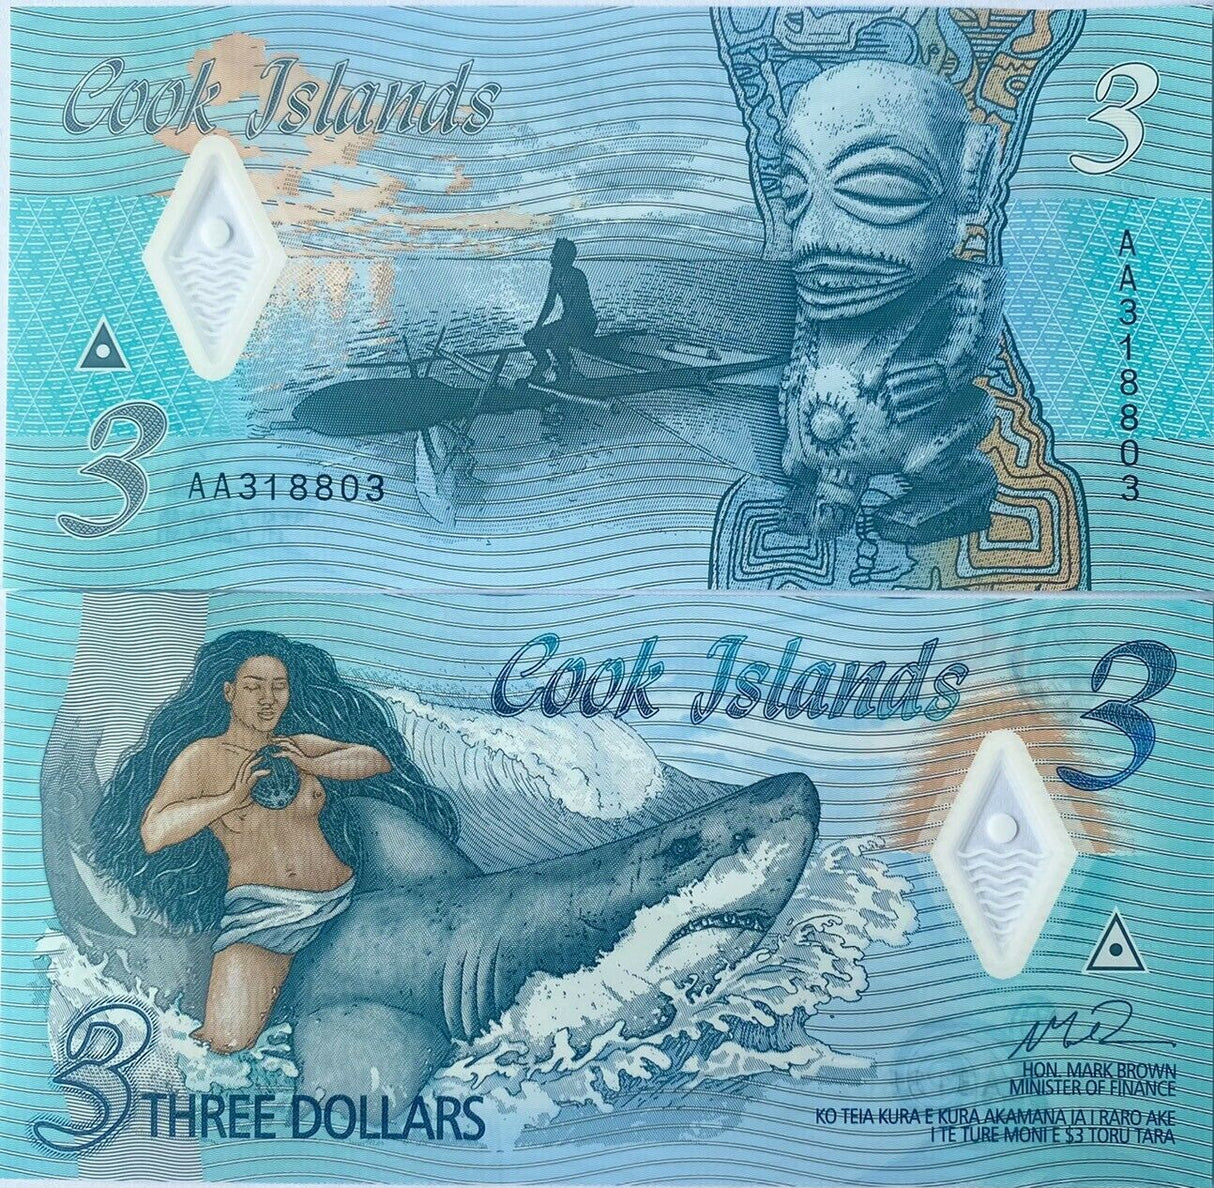 Cook Islands 3 Dollars 2021 P New Polymer UNC